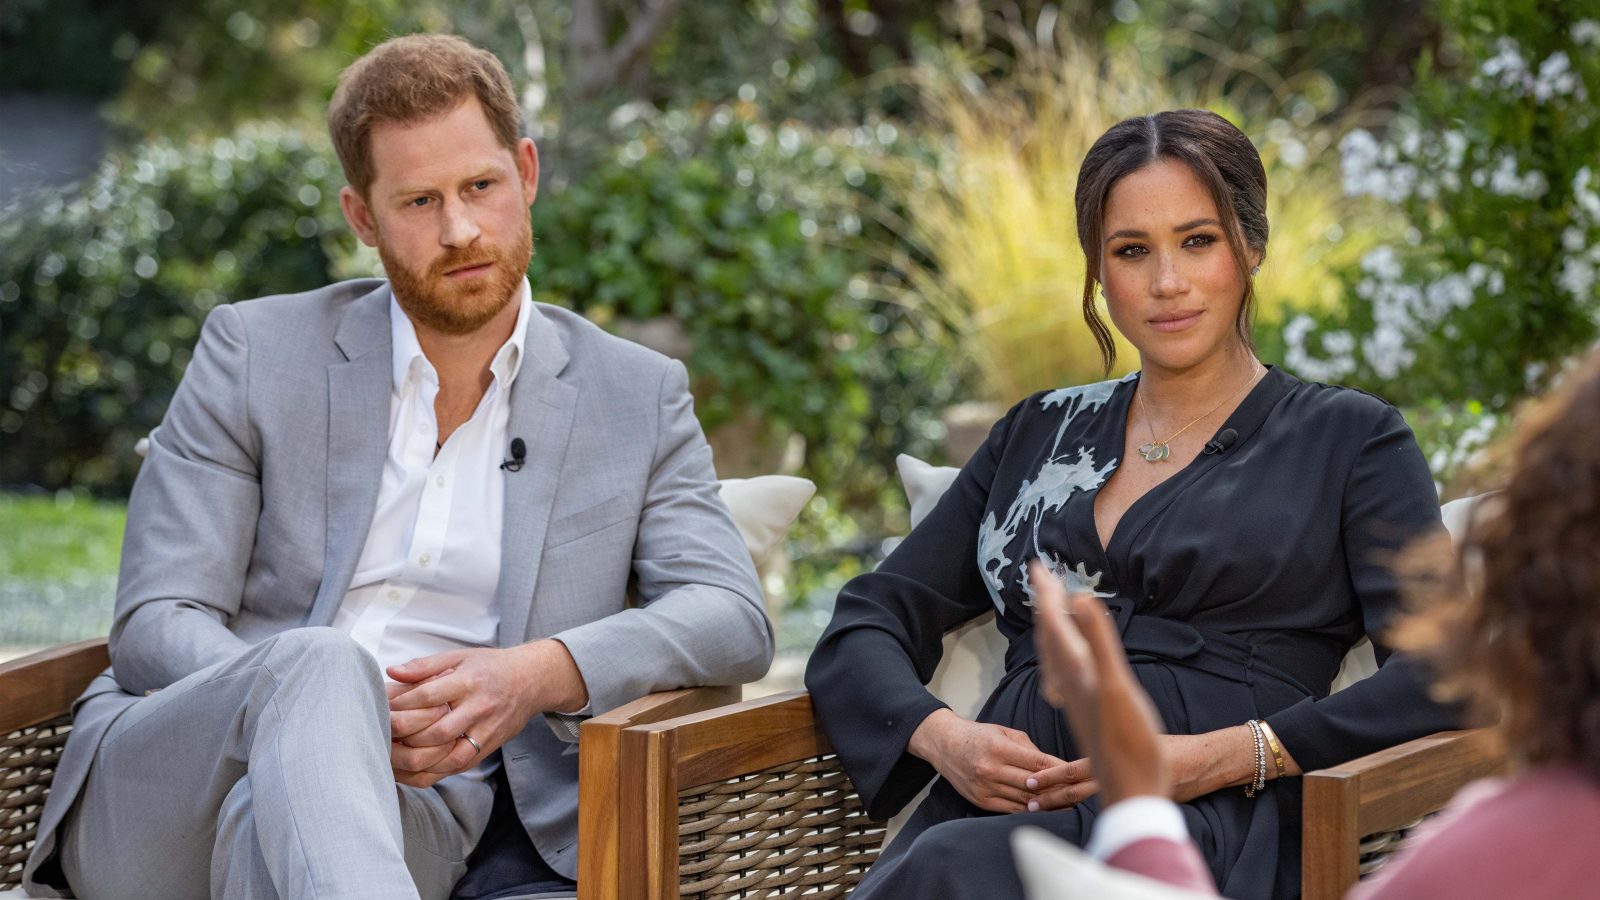 The Duke and Duchess of Sussex, Harry and Meghan get a royal snub